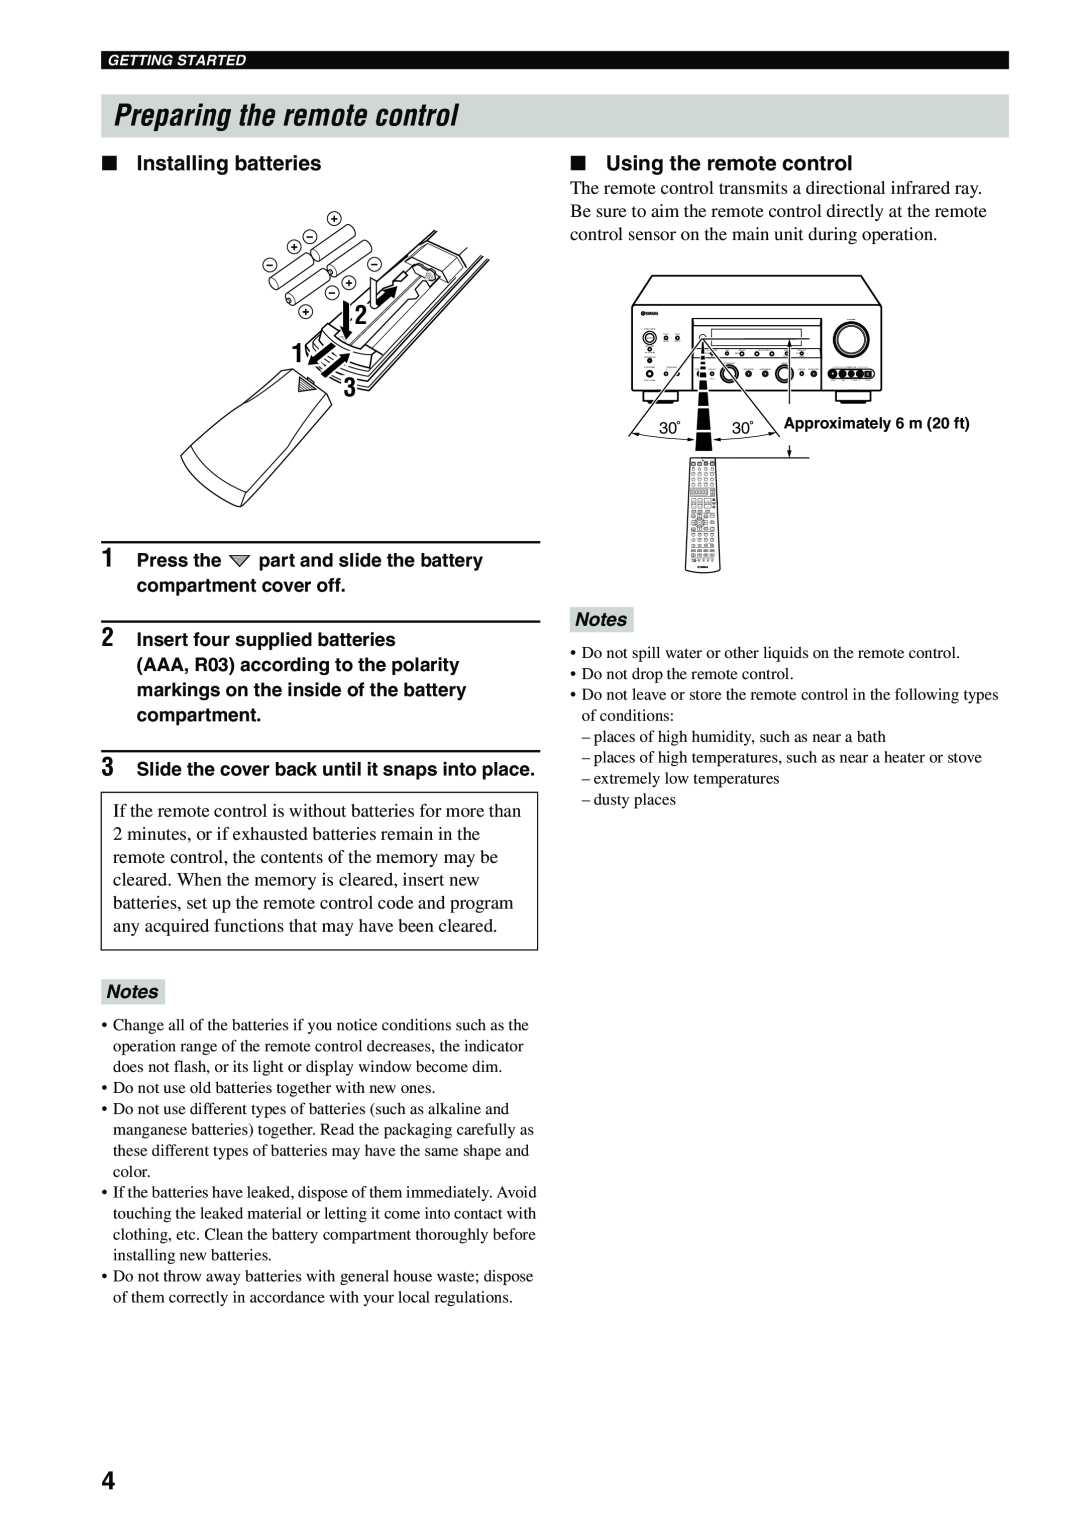 Yamaha HTR-5990 owner manual Preparing the remote control, Installing batteries, Using the remote control, Notes 